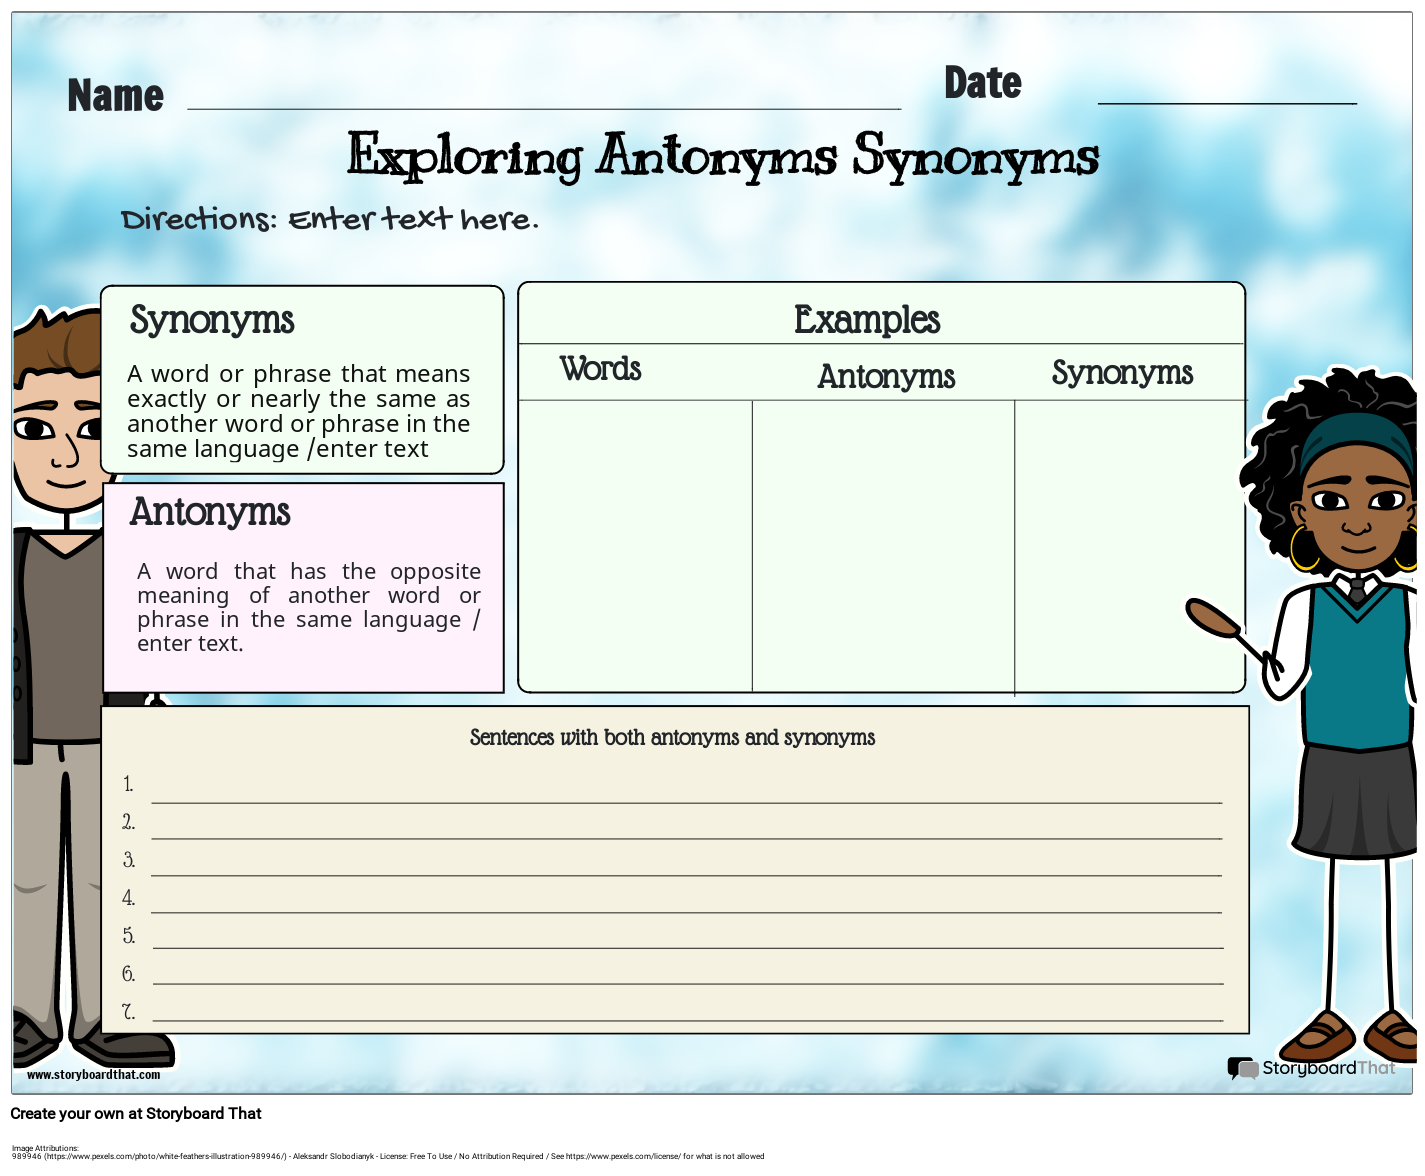 Synonyms and Antonyms Worksheet for Upper Grades